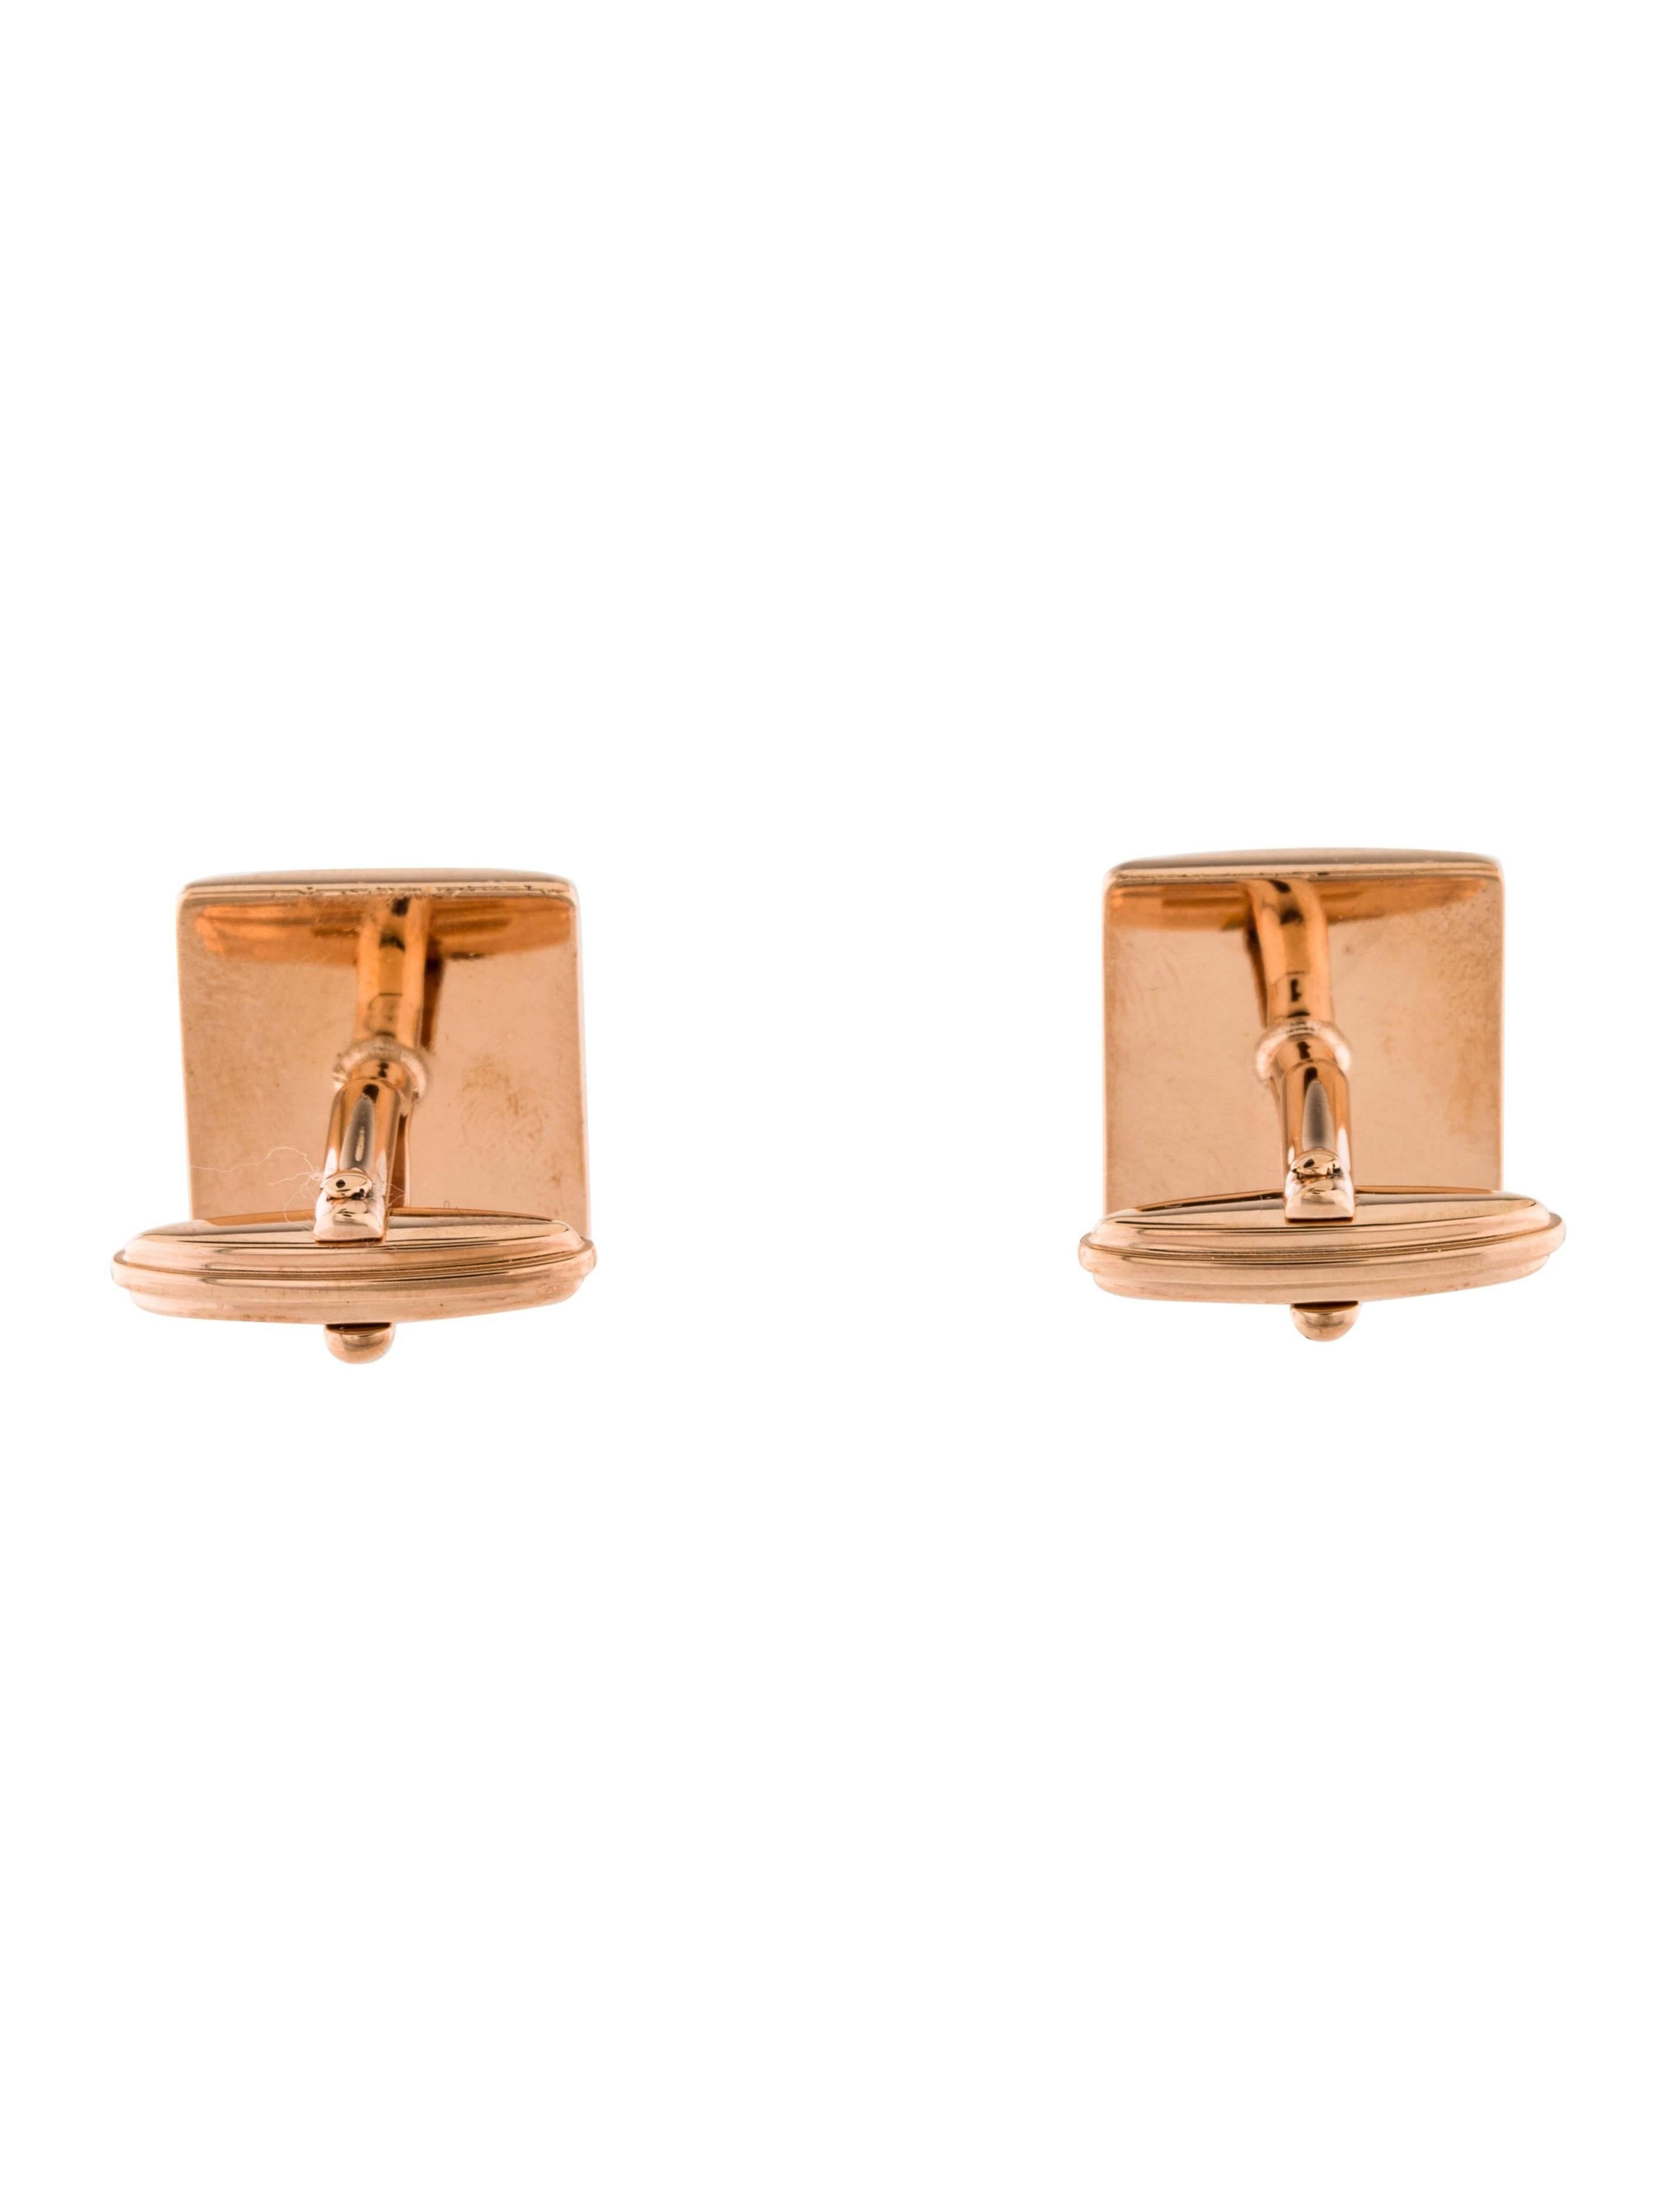 rose gold cufflinks and tie clip set